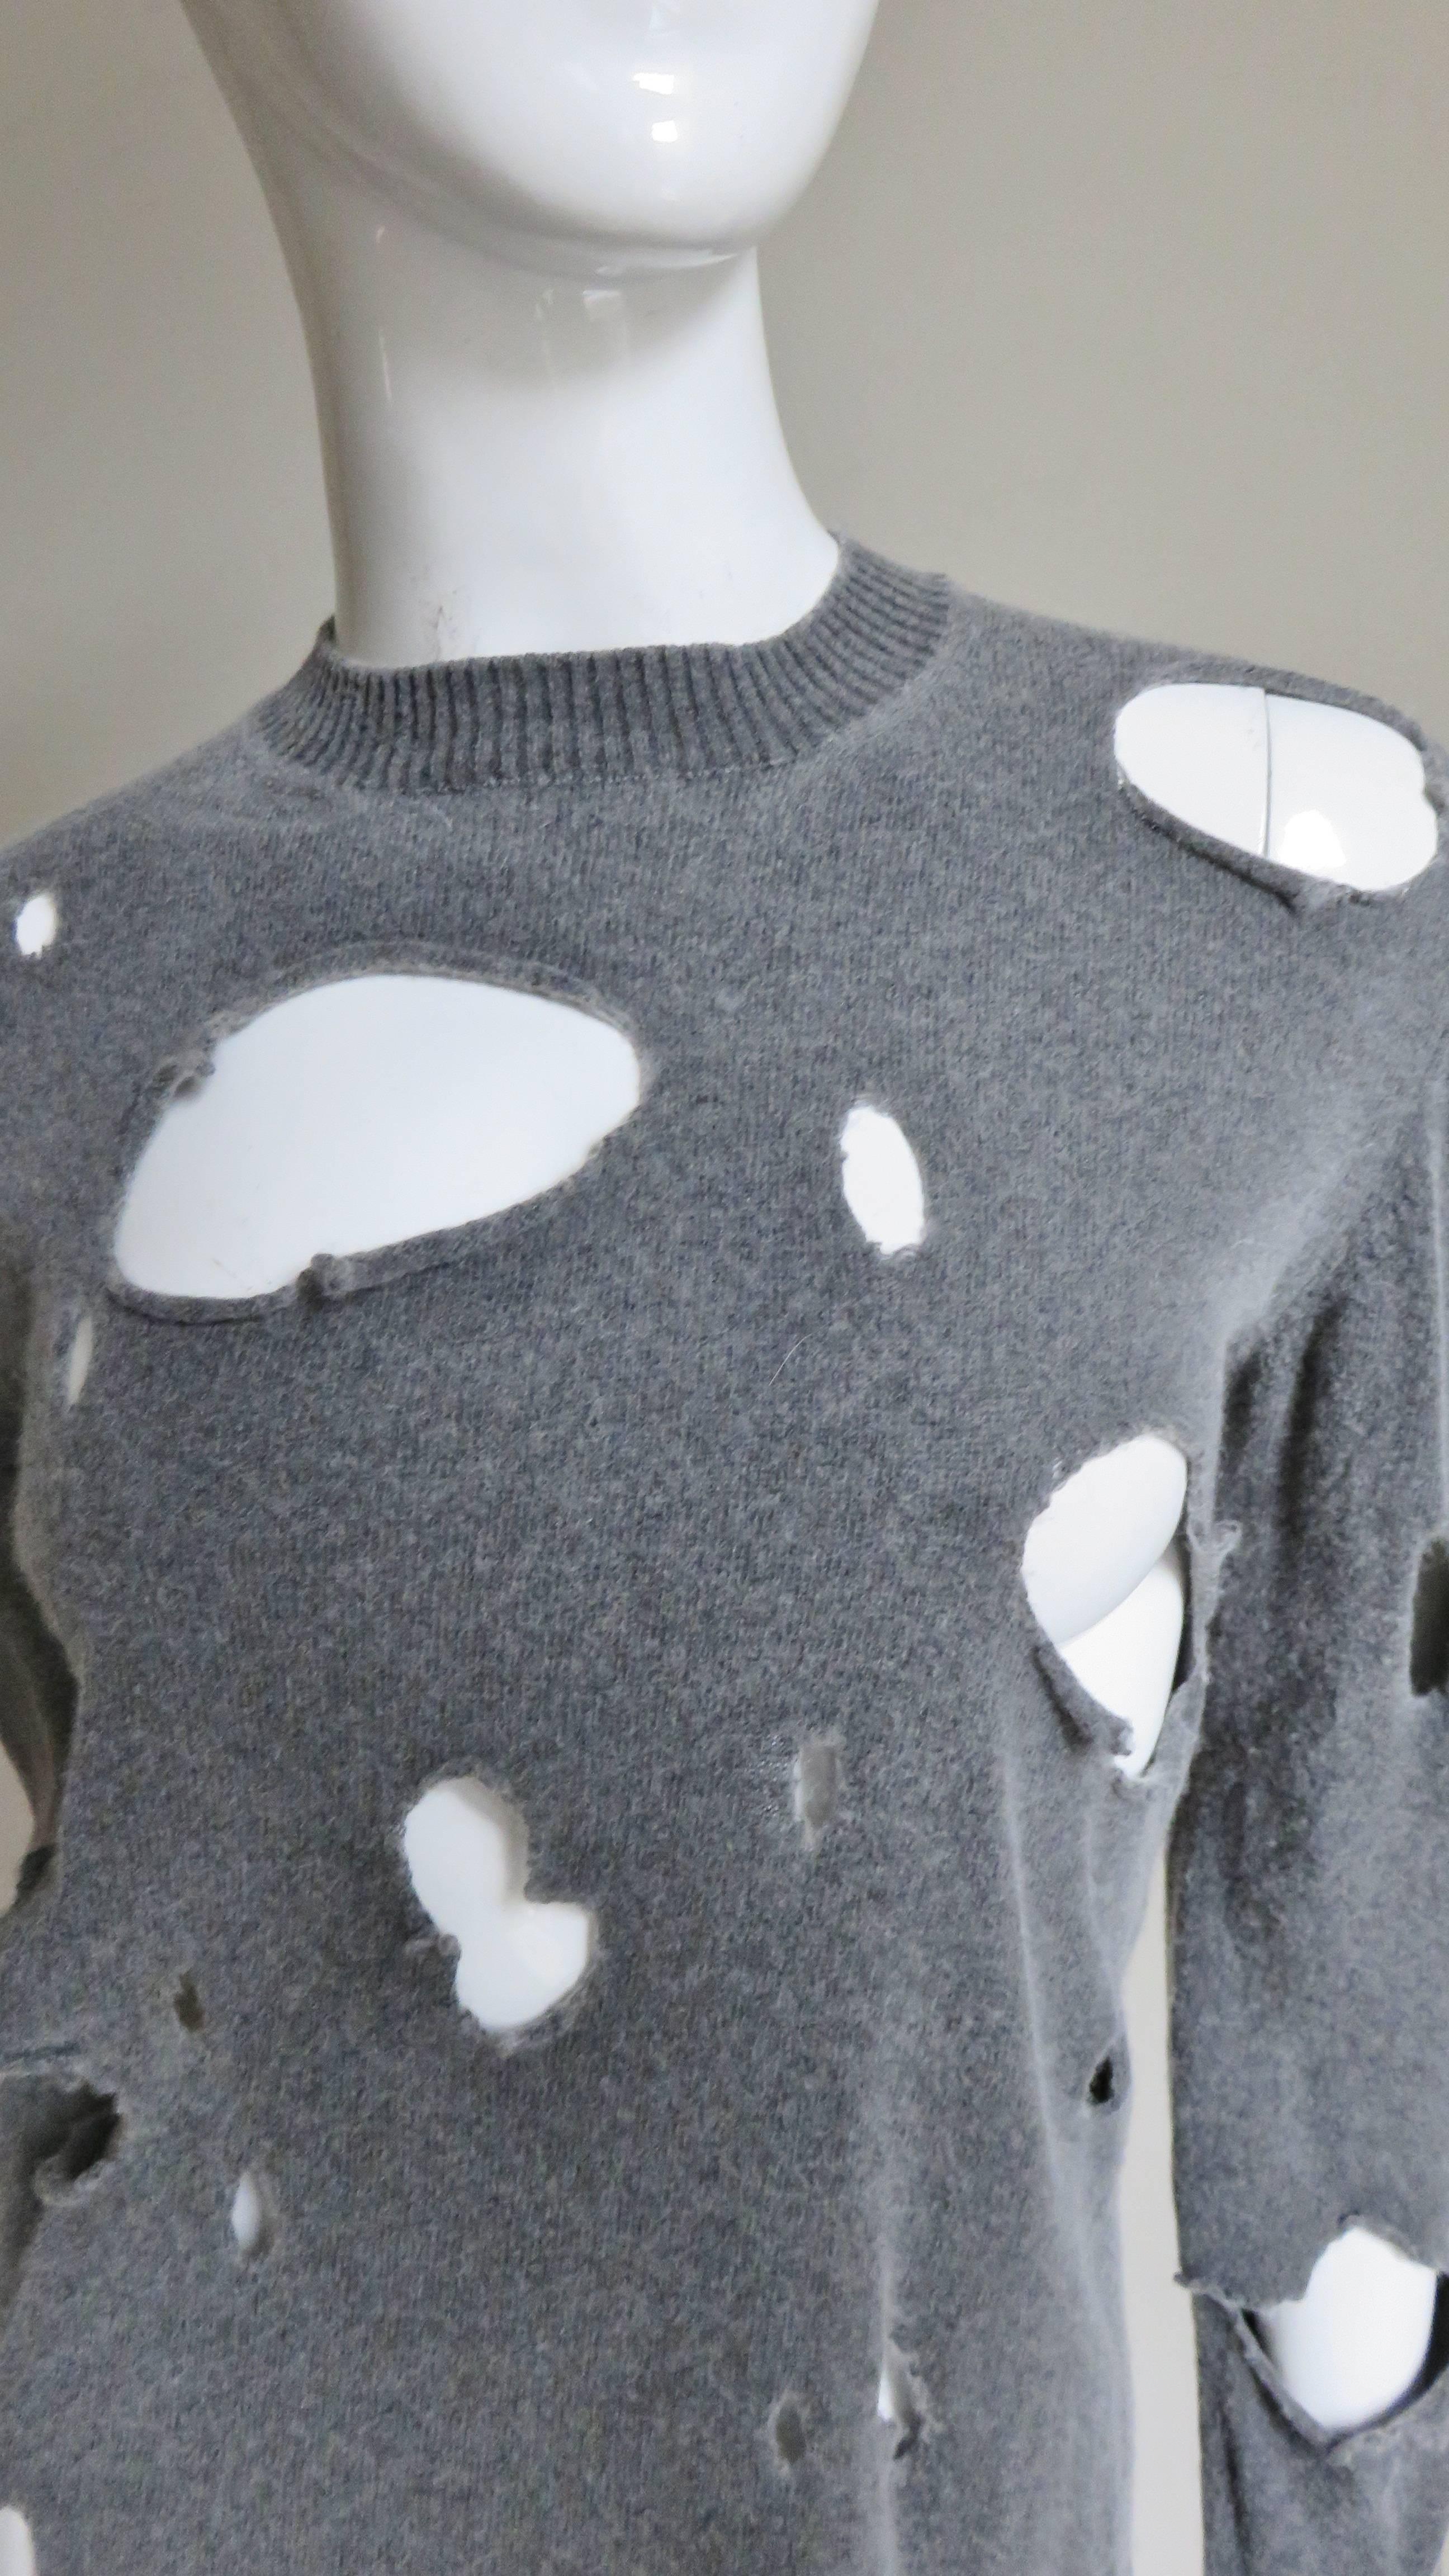 A fabulous grey wool sweater by Junya Watanabe for Comme des Garcons.  It has a crew neckline, long sleeves and is covered in strategically placed holes of varying sizes.  
Excellent condition.  Fits sizes Small, Medium, Large.

Bust 